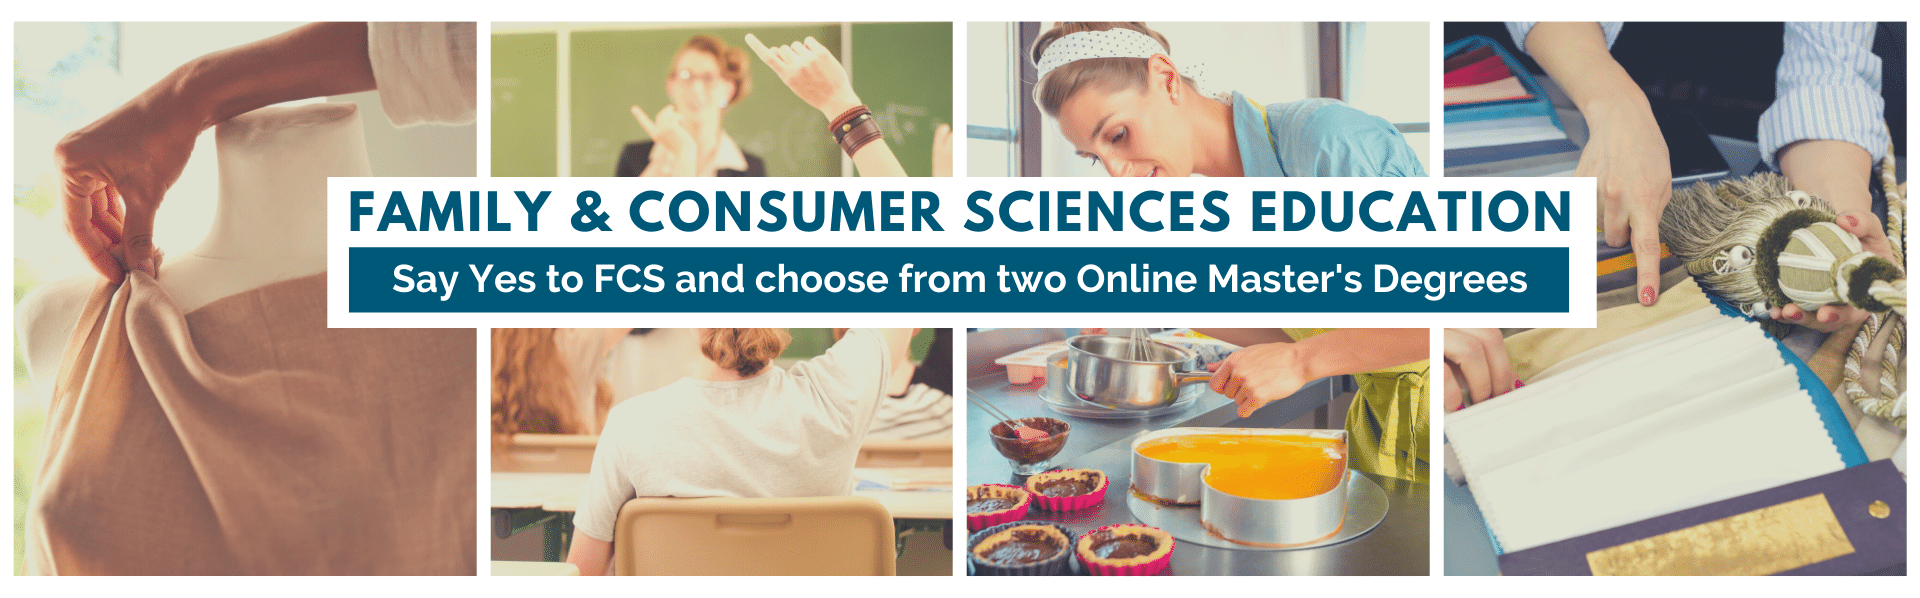 Interior design, sewing, cooking, and teaching in the classroom are just a few ways our graduates use their master’s degree. Choose from two online master’s degree in family and consumer sciences education.